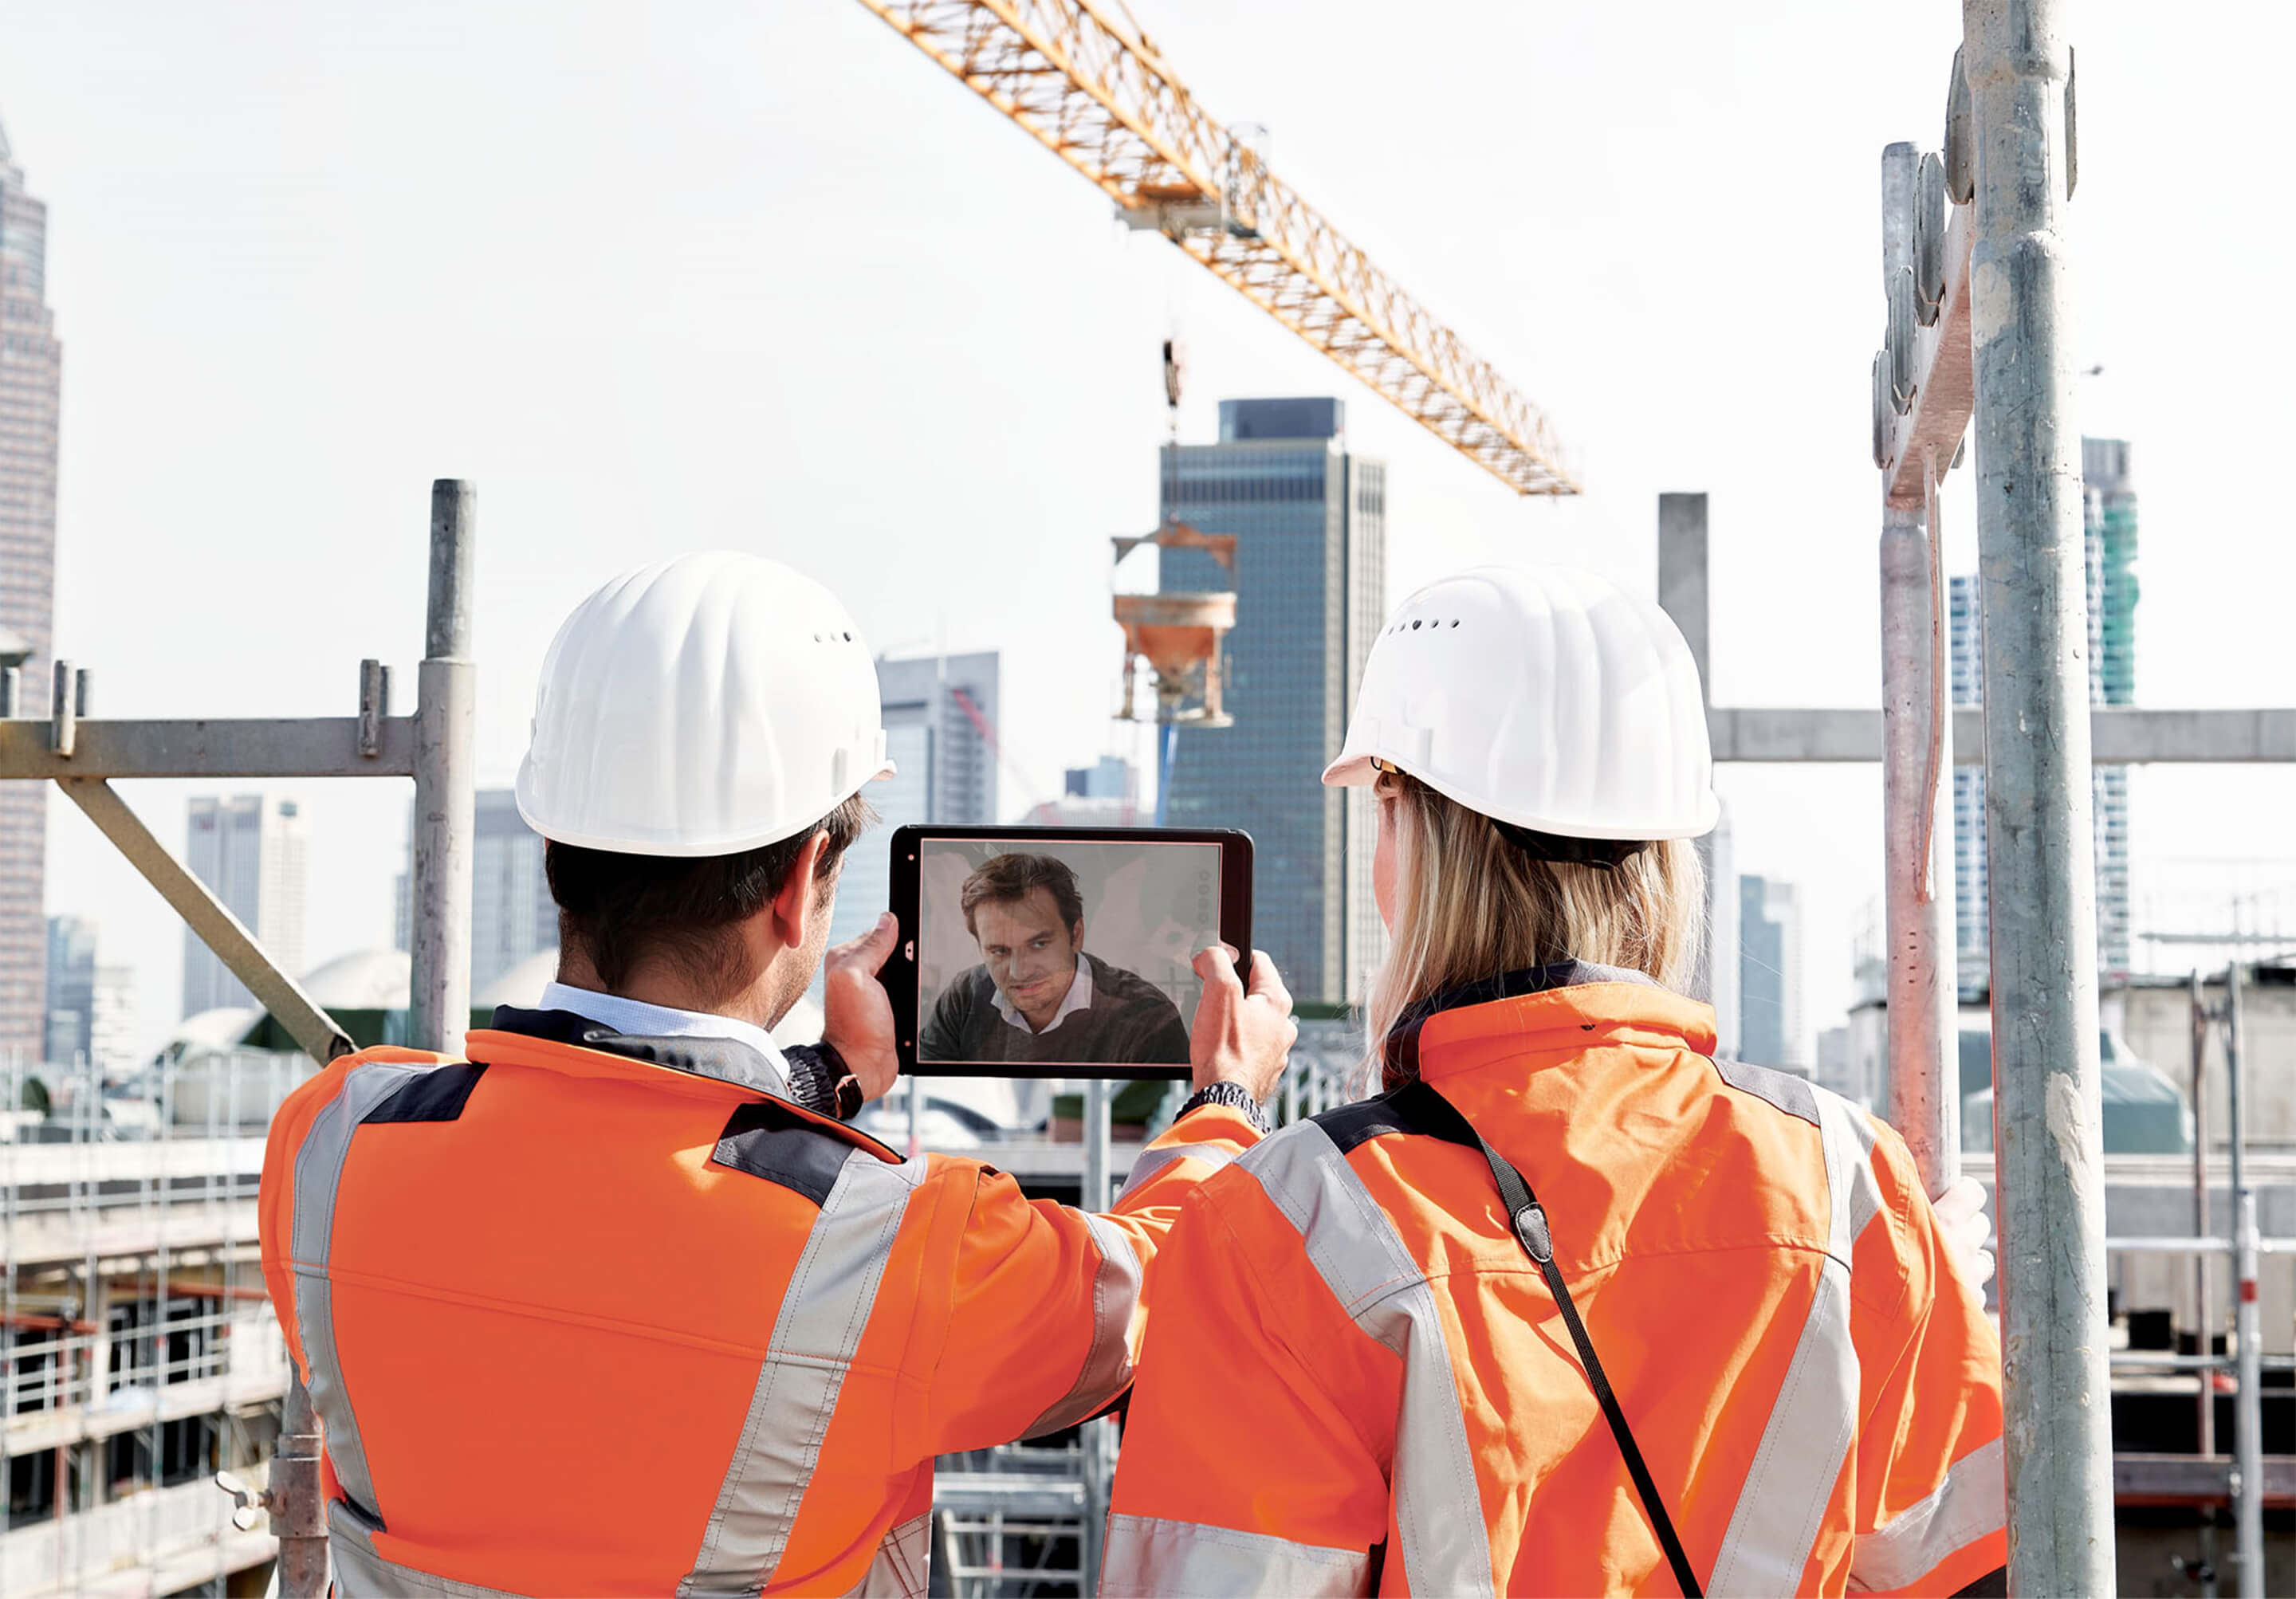 Image: two STRABAG employees on a construction site with an iPad